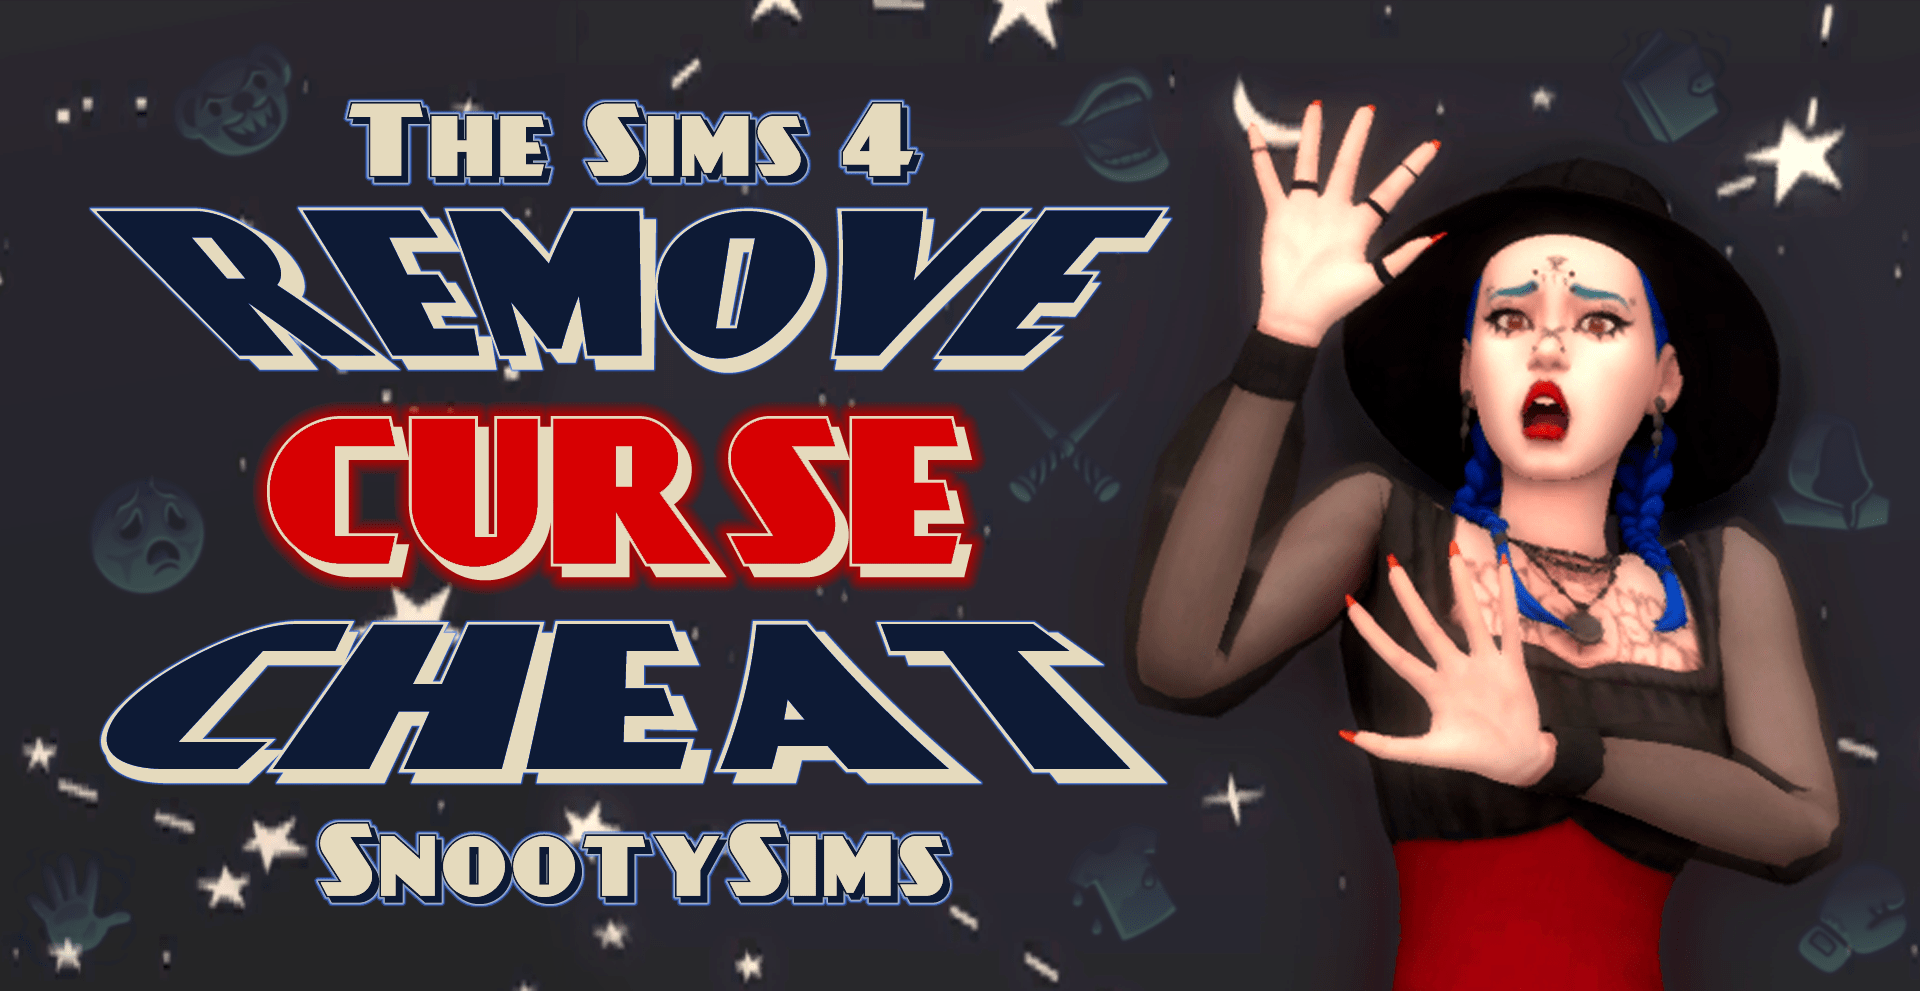 sims 4 remove curse combustion